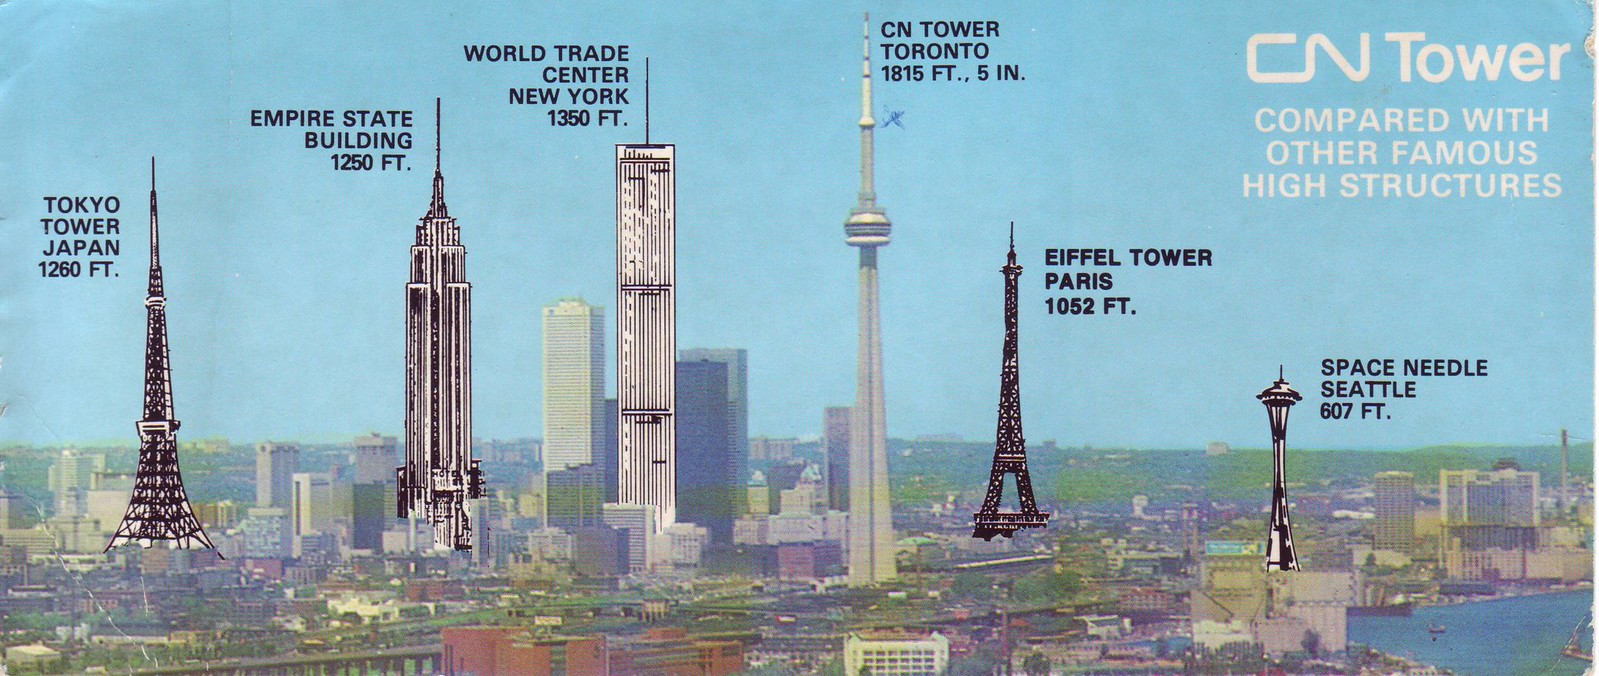 empire state building vs cn tower